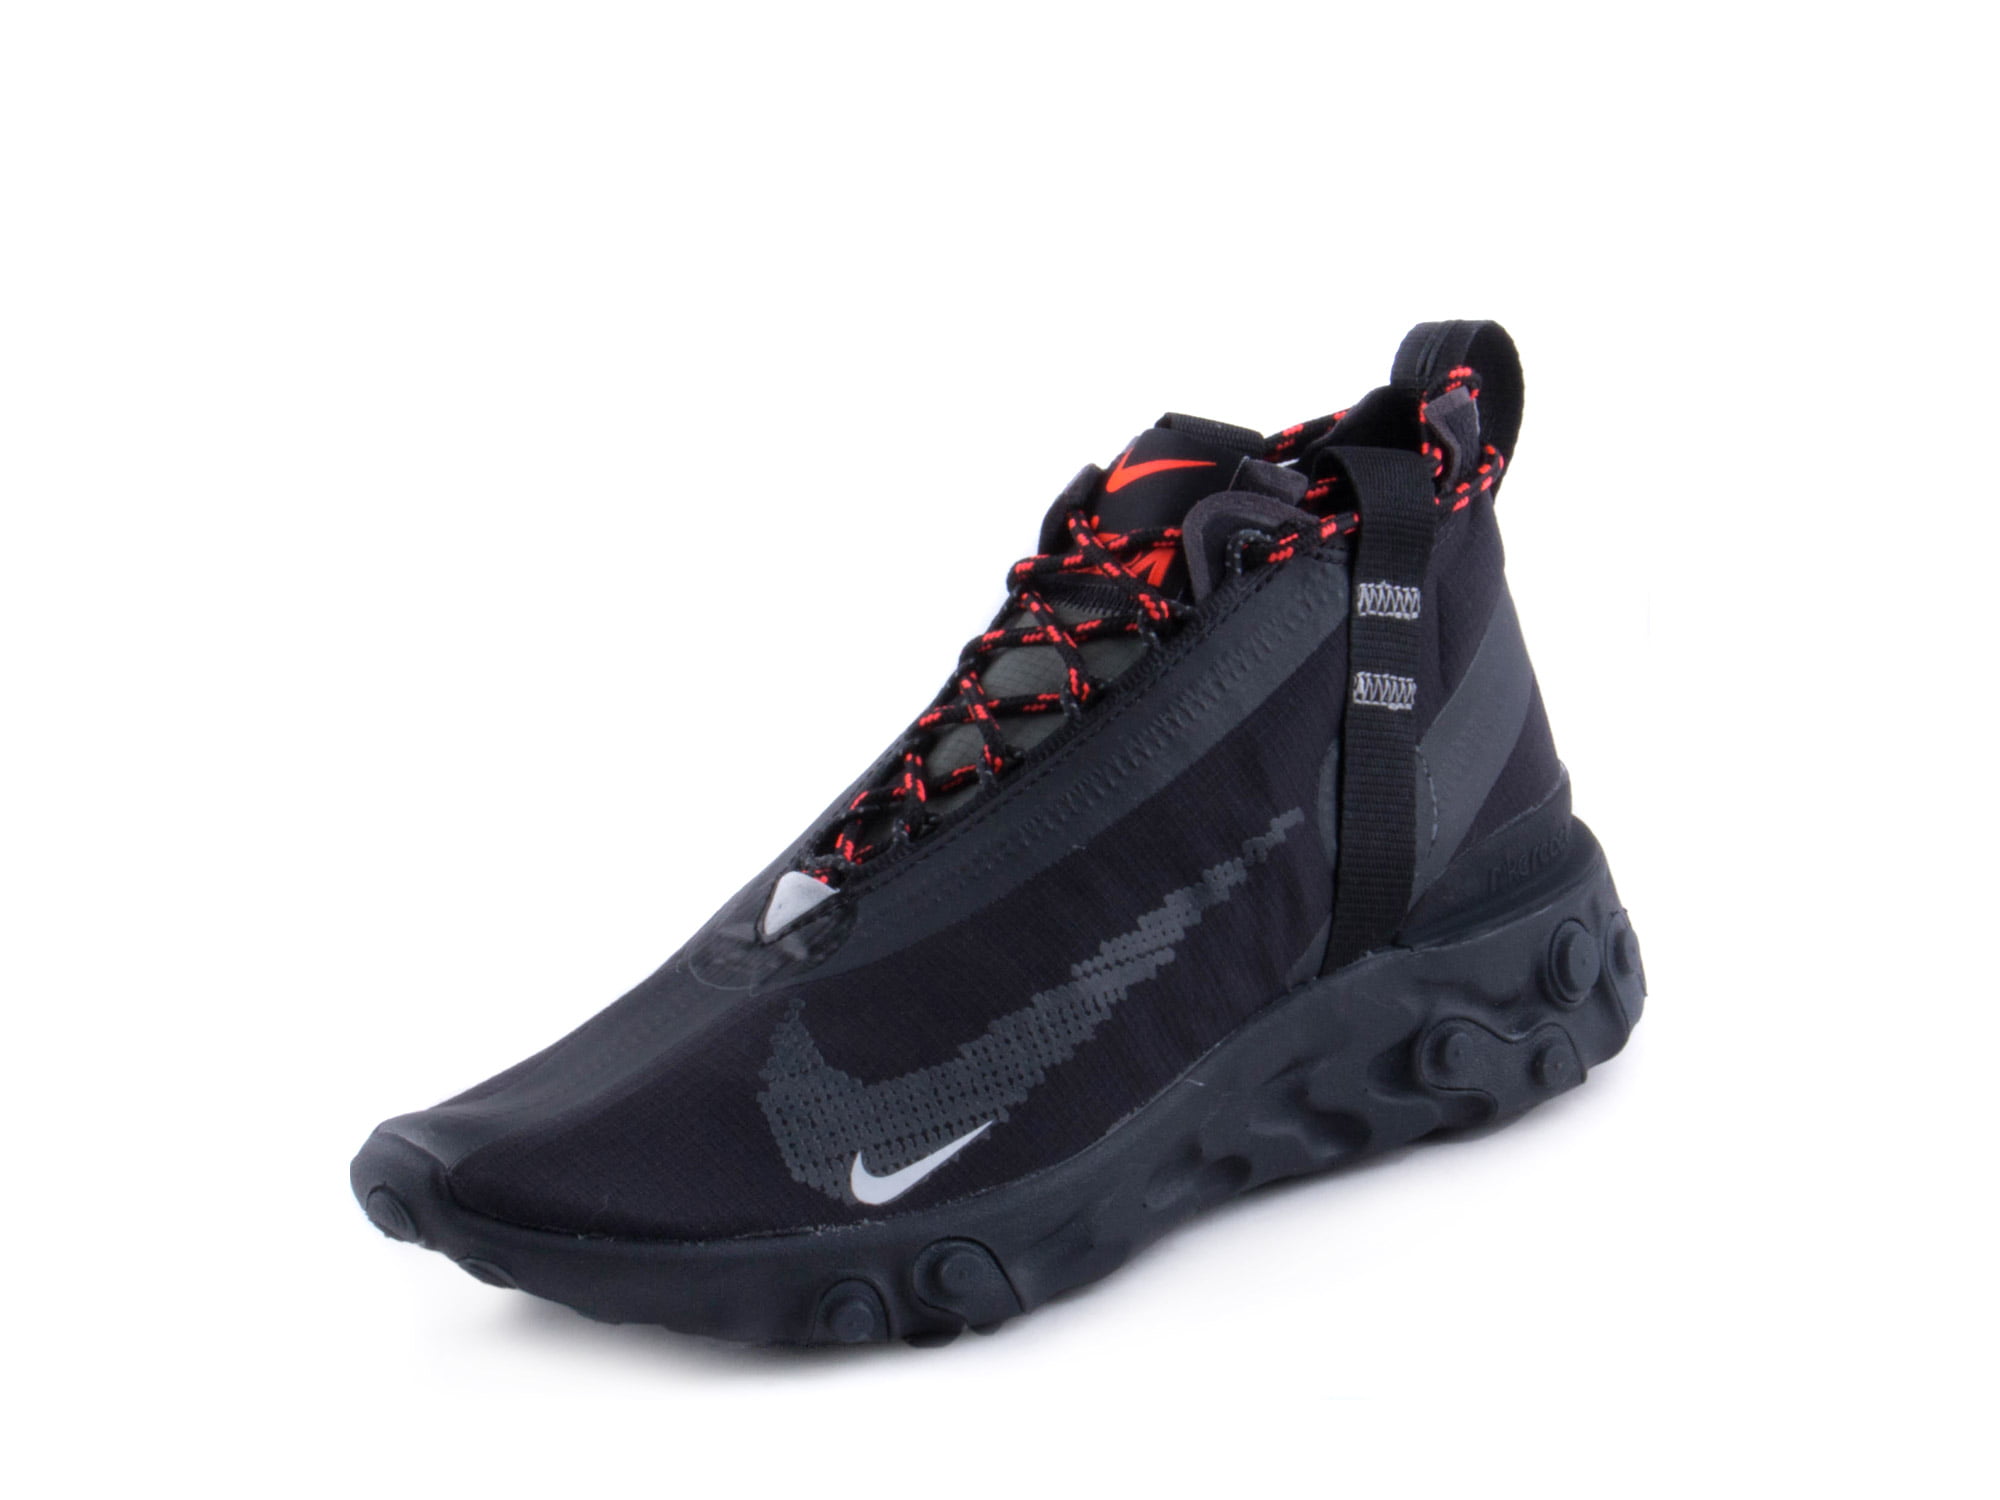 Chapel Fade out heroine Nike Mens React Runner Mid WR ISPA Black/White-Anthracite AT3143-001 -  Walmart.com